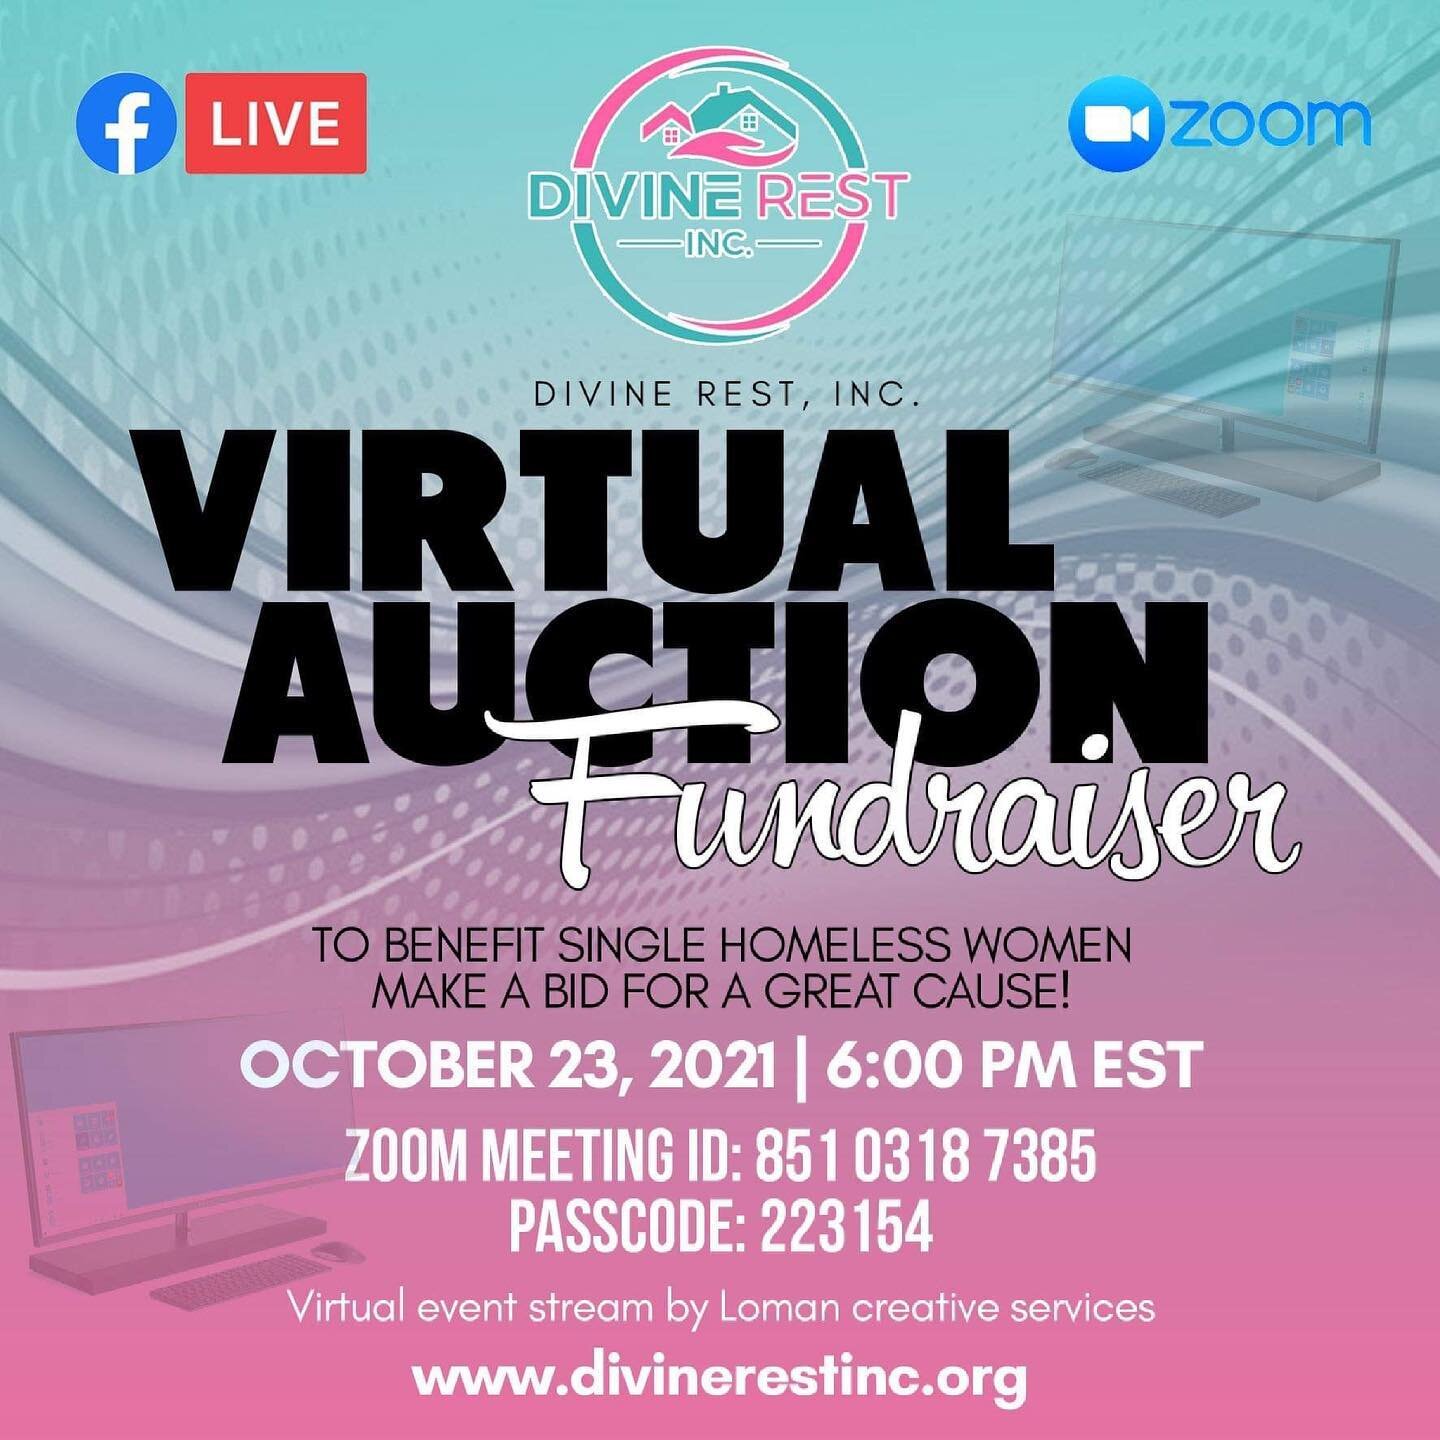 Bid for a cause! We need your donation of an auction item or service to make this a successful fundraiser. This day is also my birthday, so you&rsquo;re being a blessing to me by blessing the organization!  Send an email to divinerestinc@gmail.com.